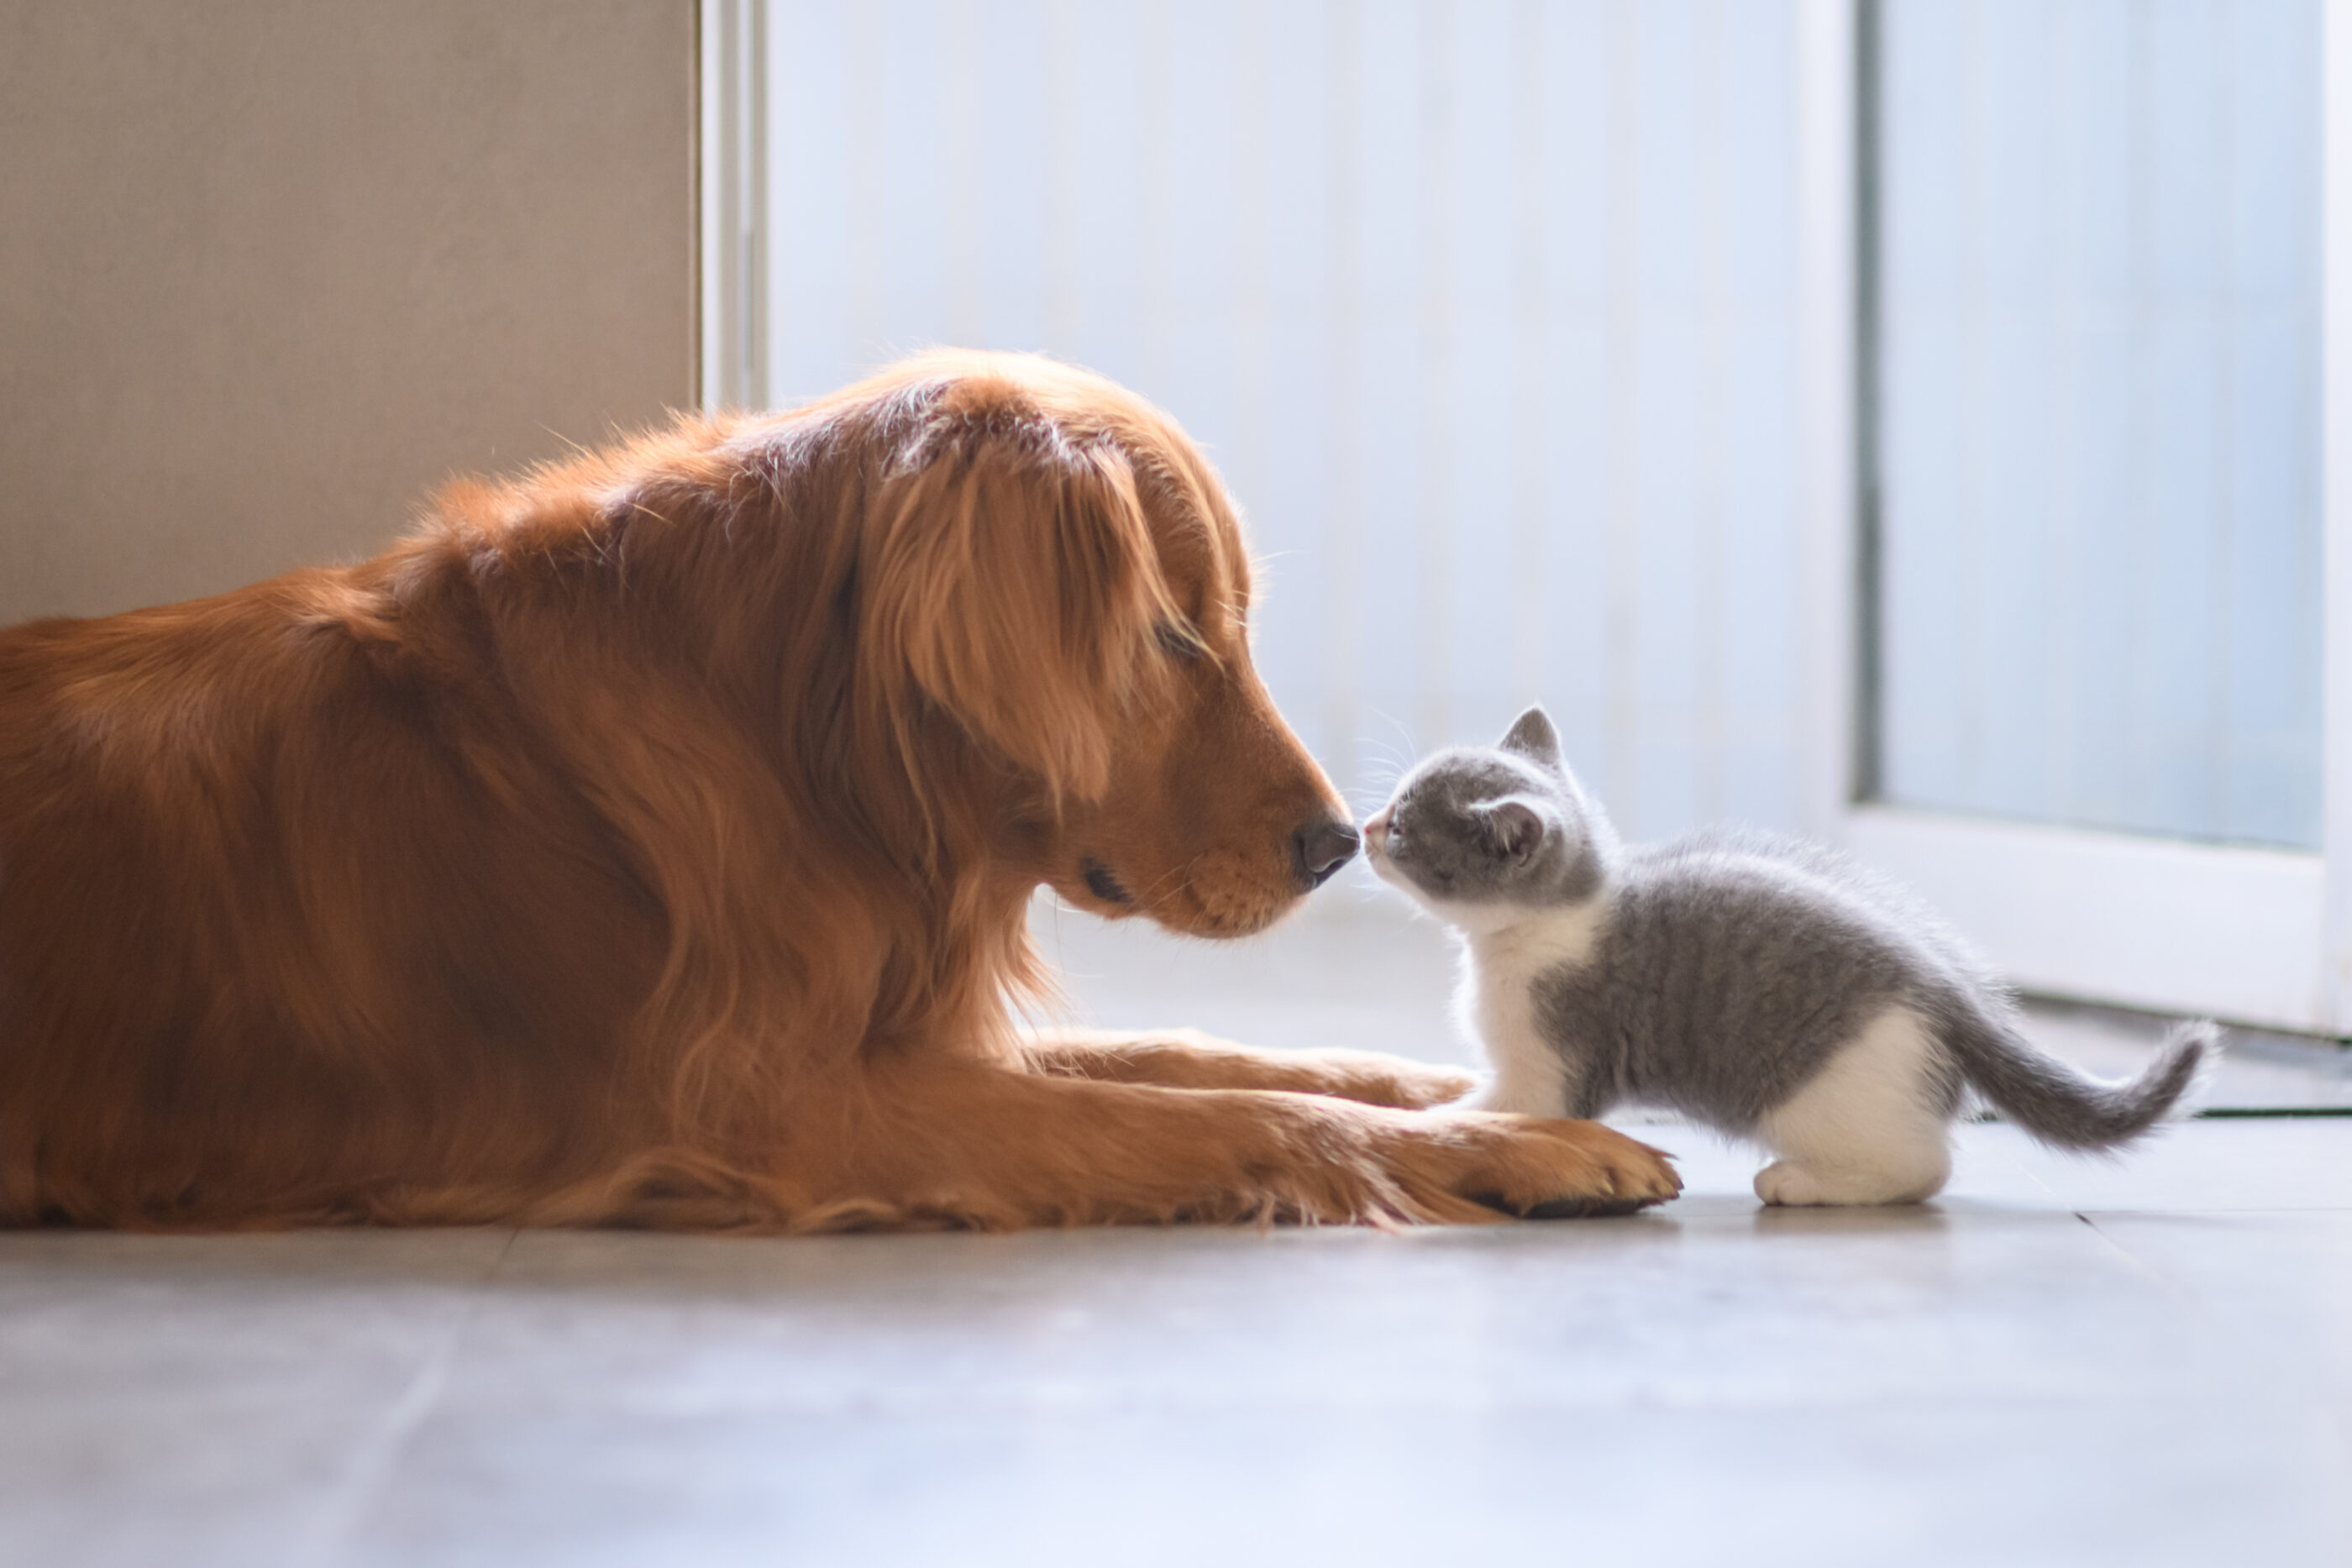 Dog and kitten meeting